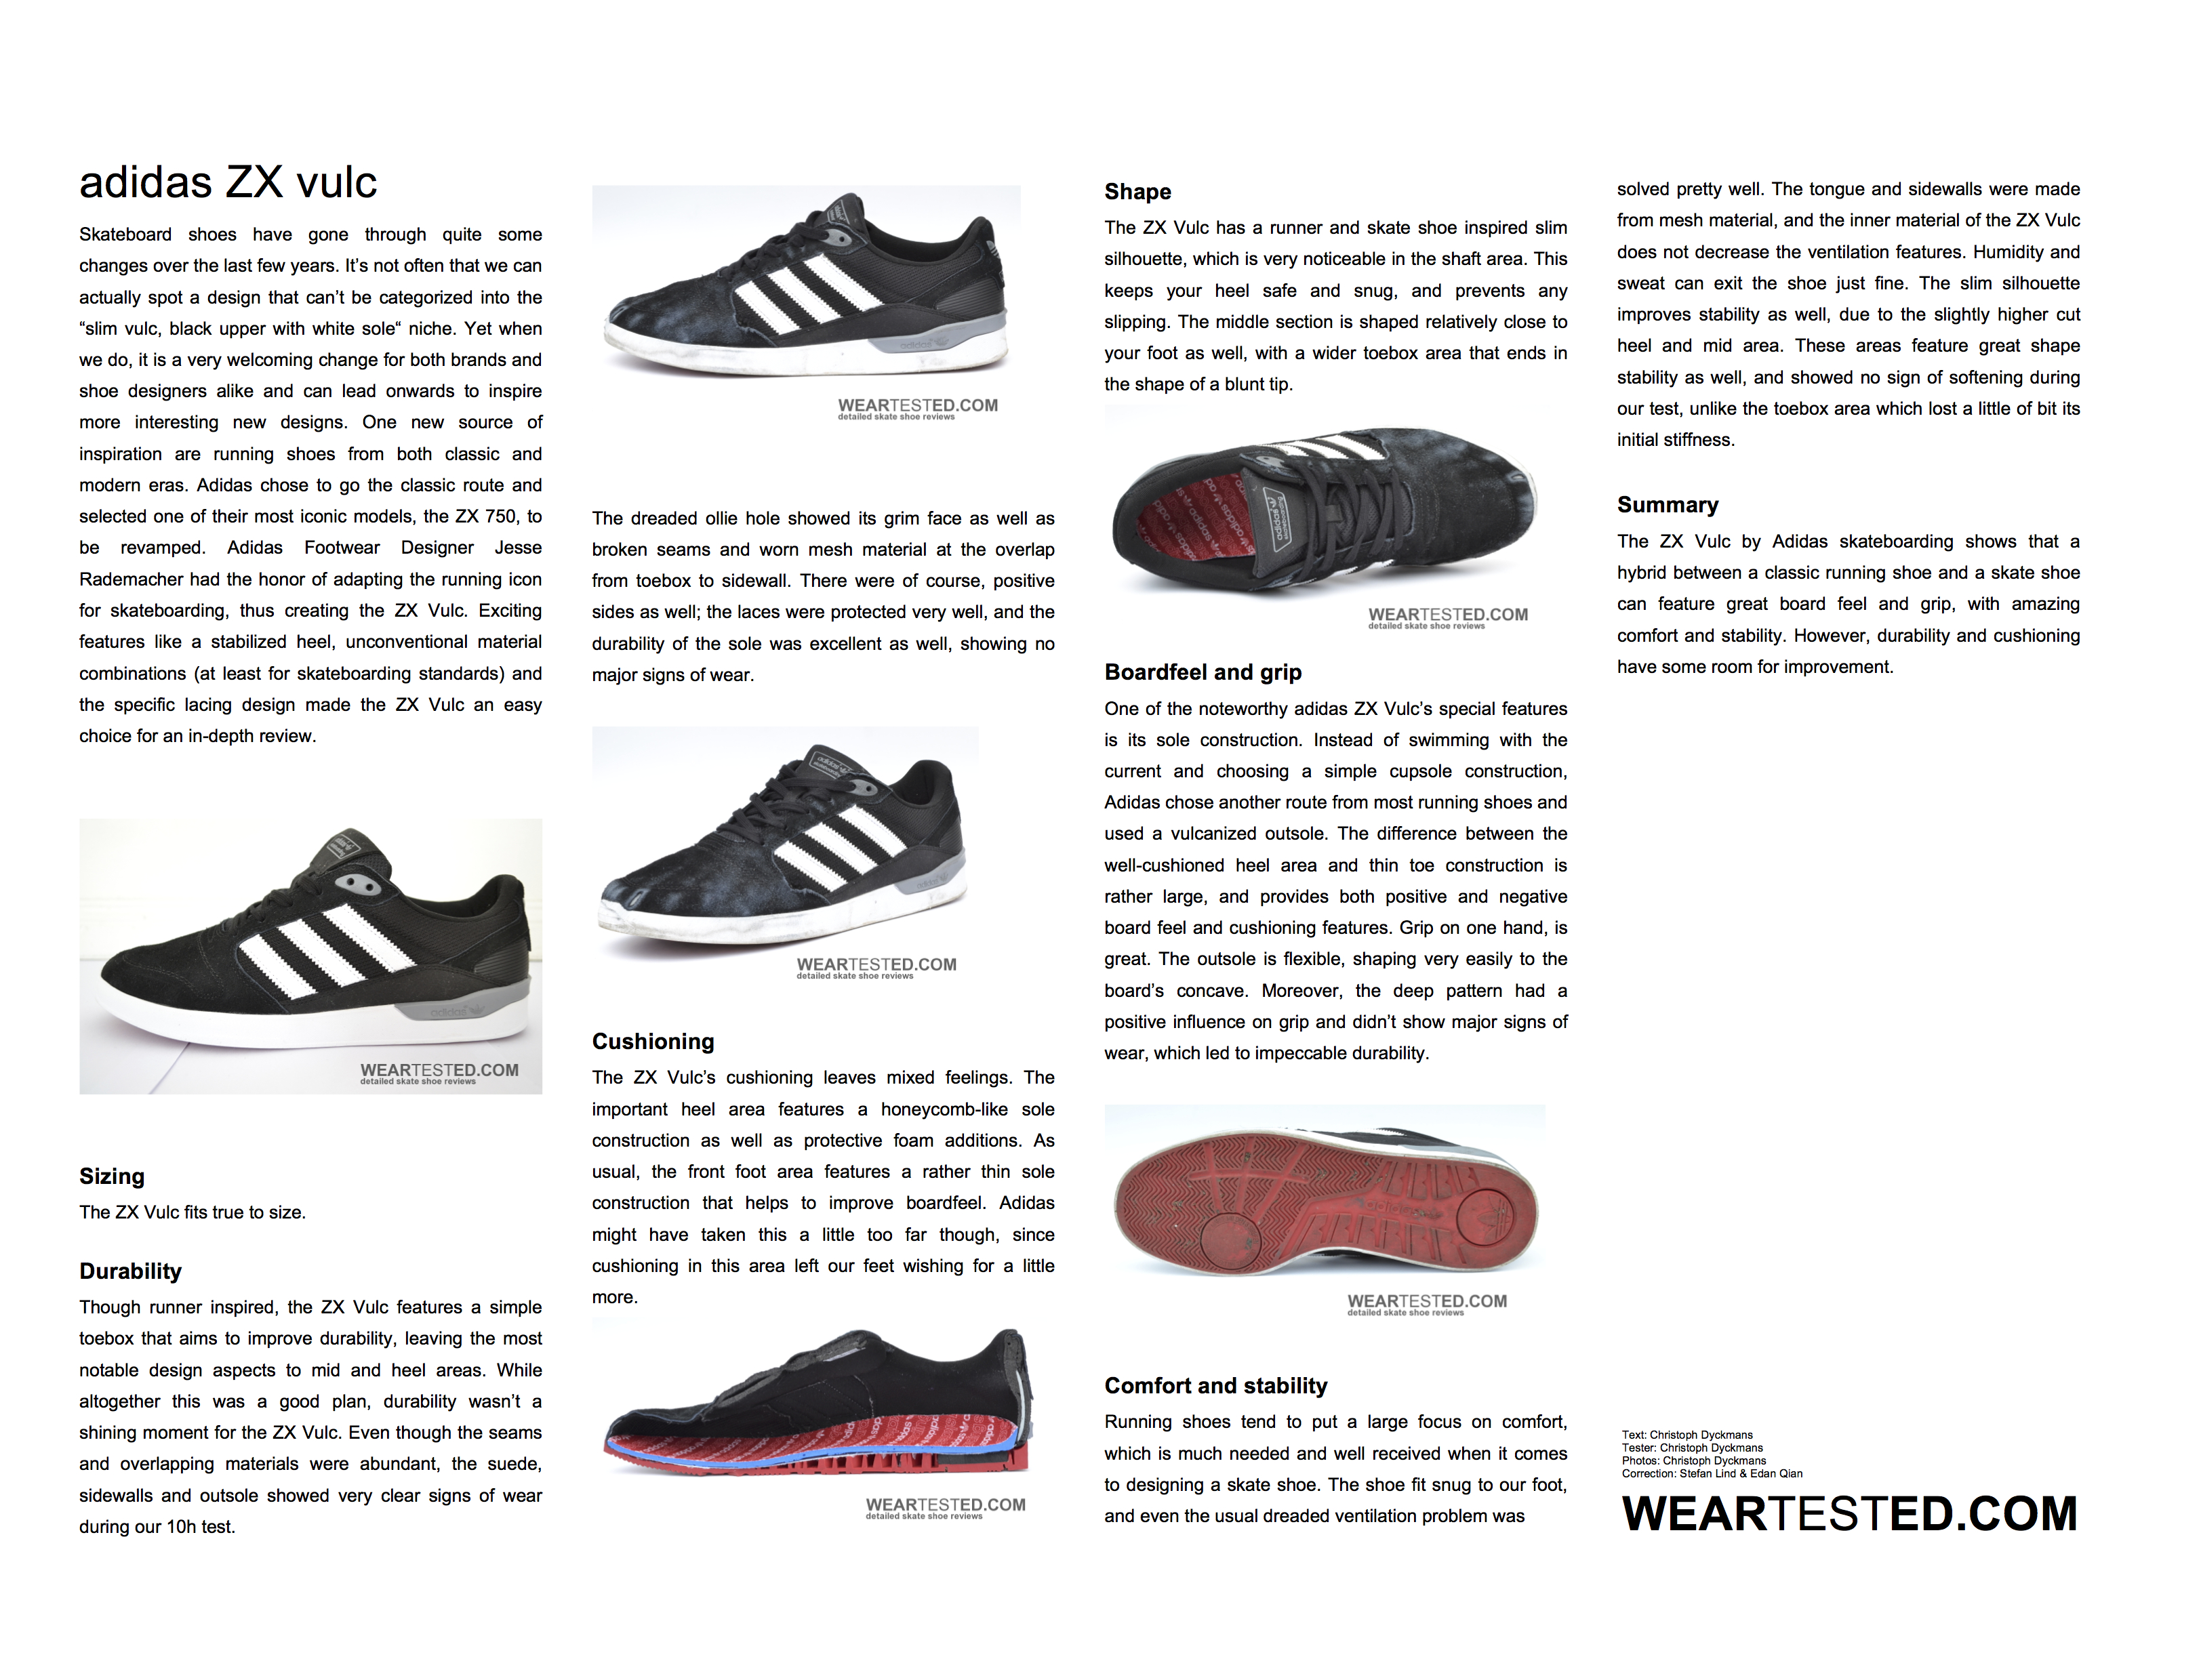 adidas - Weartested - detailed skate shoe reviews